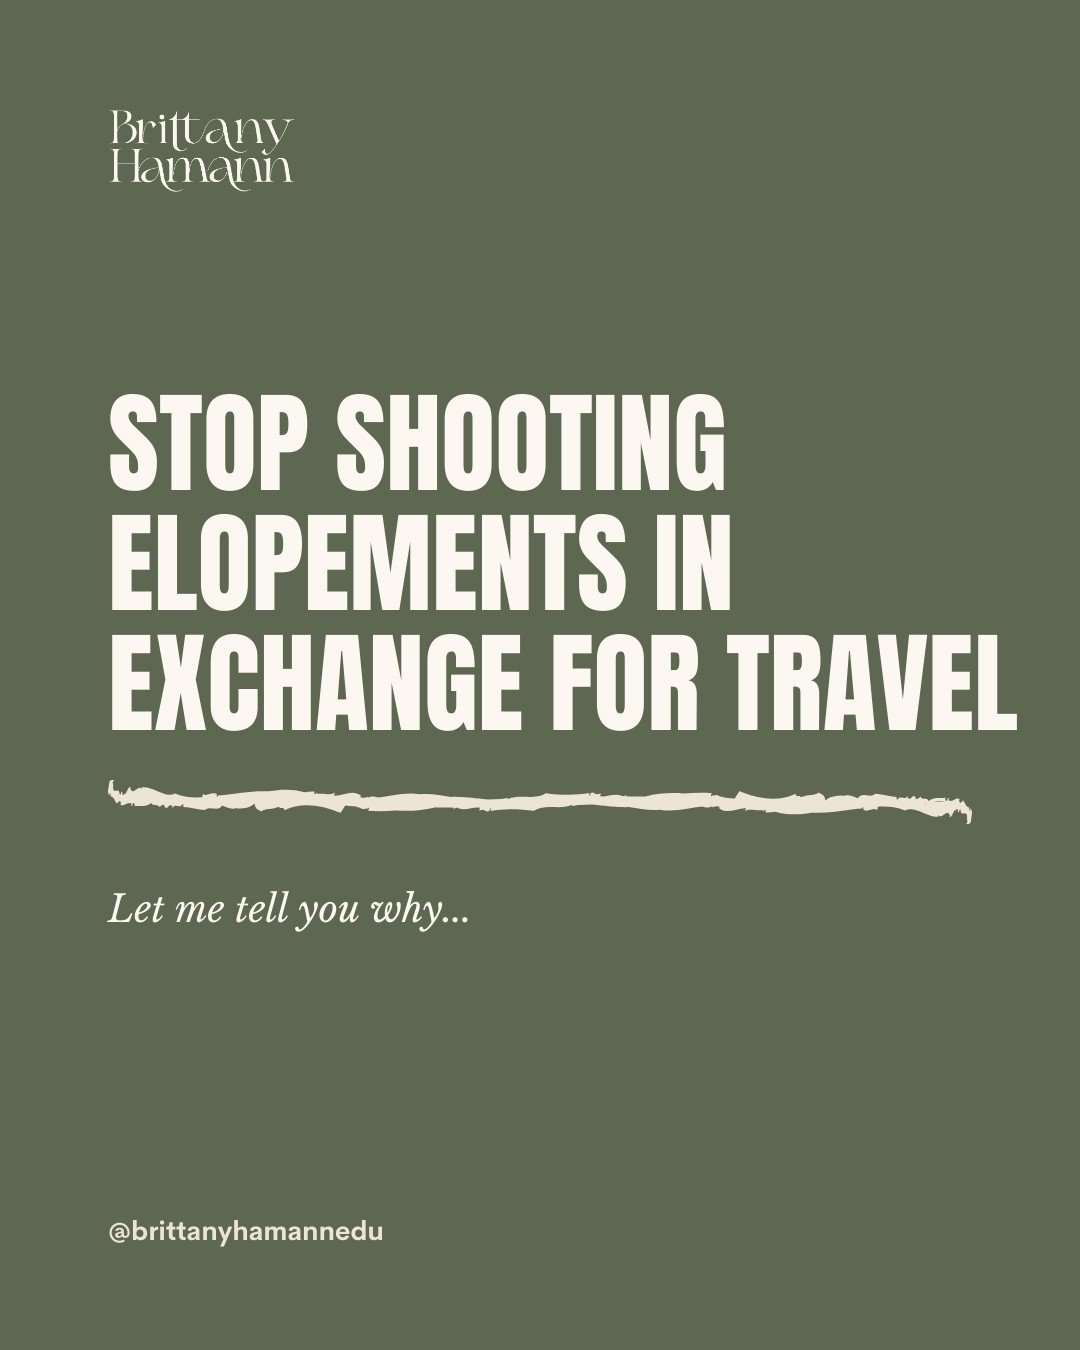 I know this is a controversial topic for photographers, but this is why I don't recommend shooting elopements in exchange for travel... ⁠
⁠
What are your thoughts? Let me know in the comments!⁠
⁠
#elopementphotography #elopementphotographer #travelph